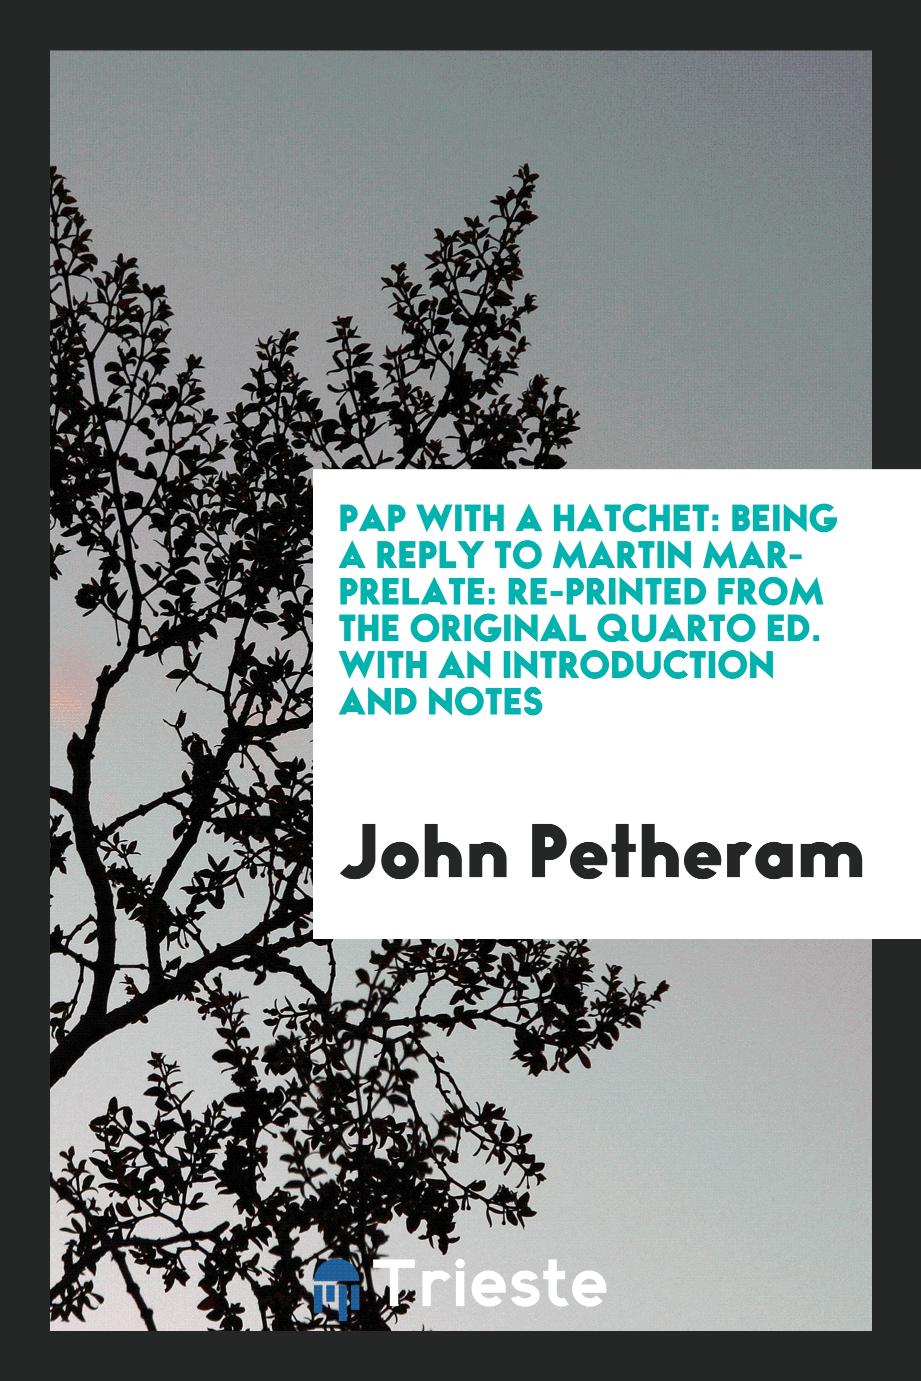 Pap with a hatchet: being a reply to Martin Mar-prelate: re-printed from the original quarto ed. with an introduction and notes